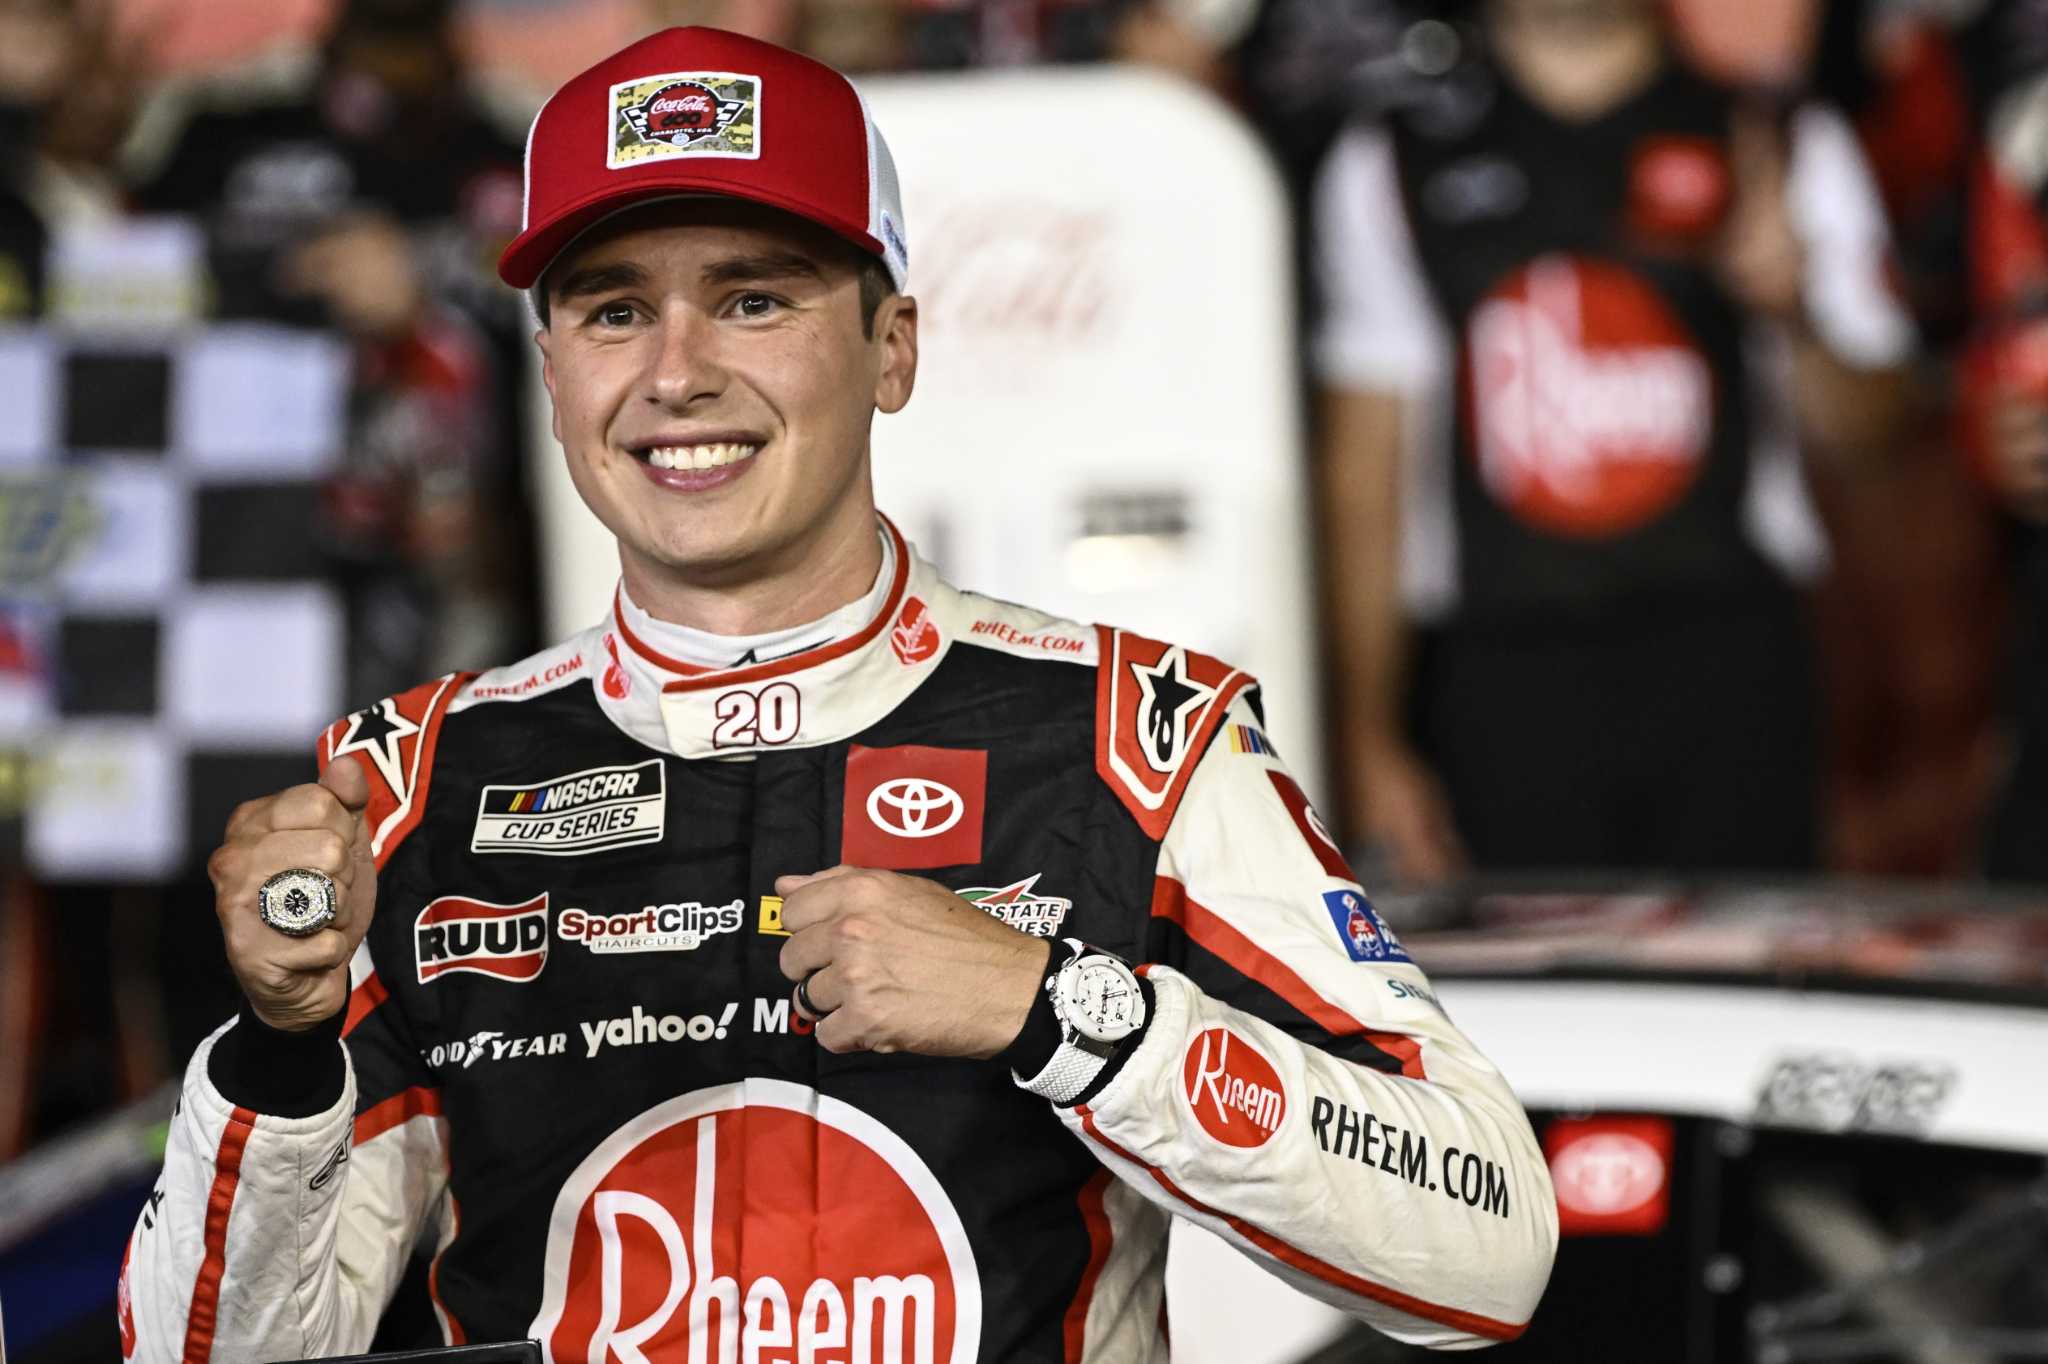 Christopher Bell remains undefeated with his fourth consecutive victory in the NASCAR Xfinity Series in New Hampshire